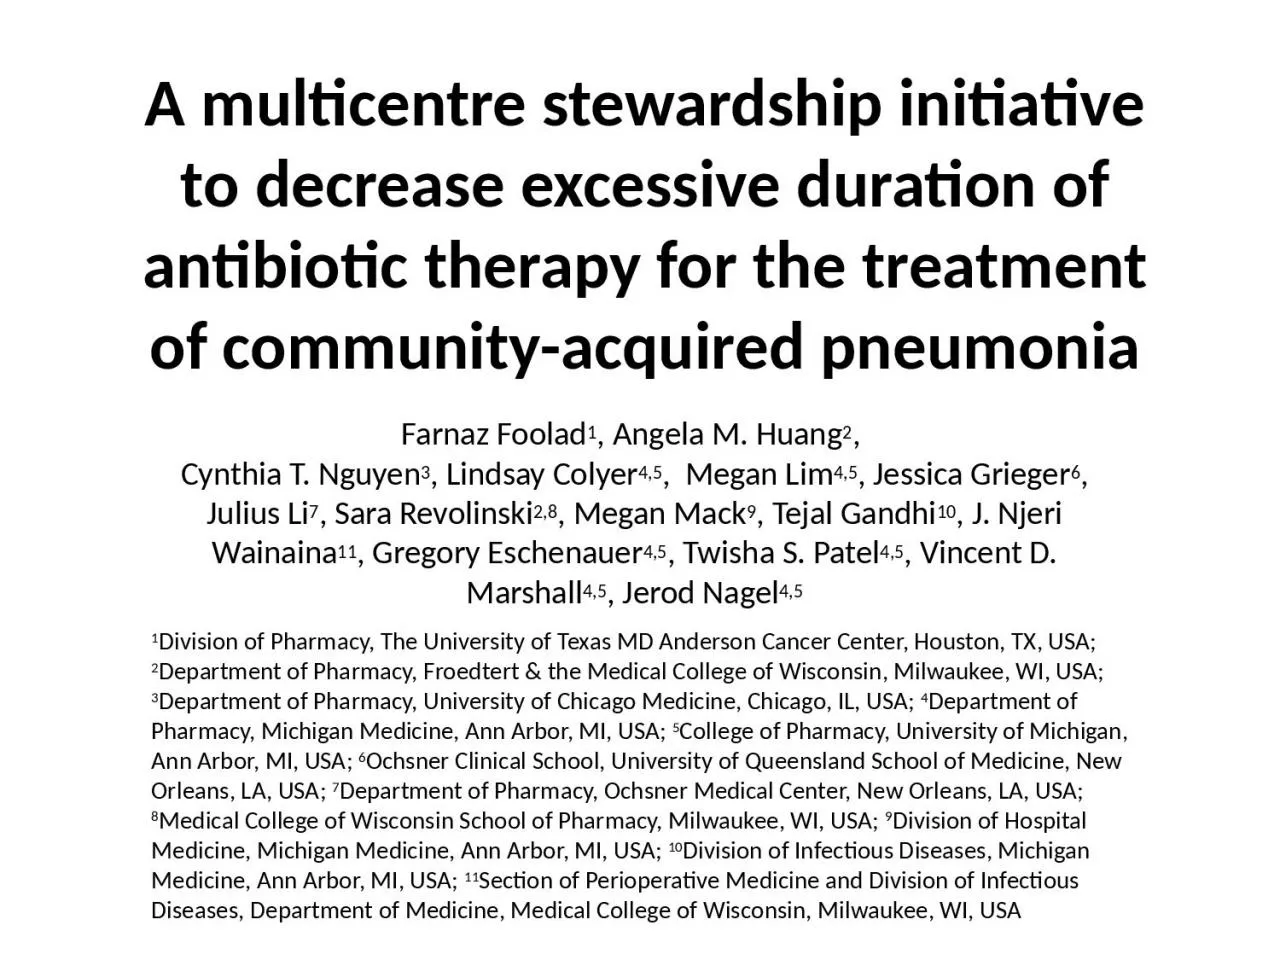 A  multicentre  stewardship initiative to decrease excessive duration of antibiotic therapy